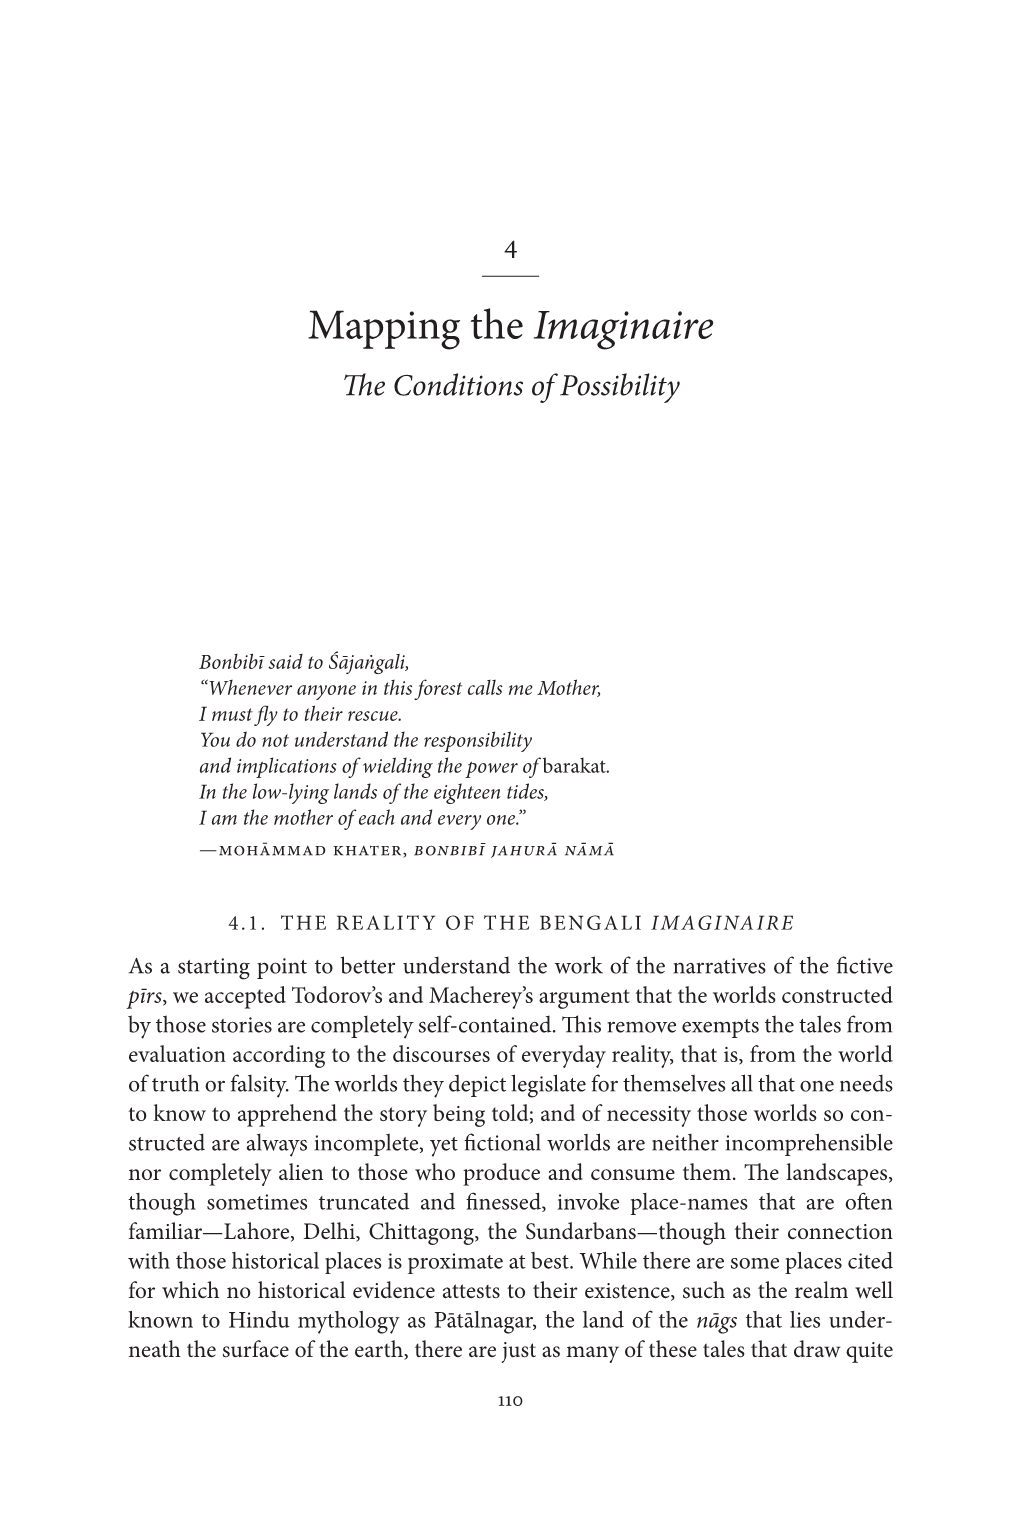 Mapping the Imaginaire the Conditions of Possibility